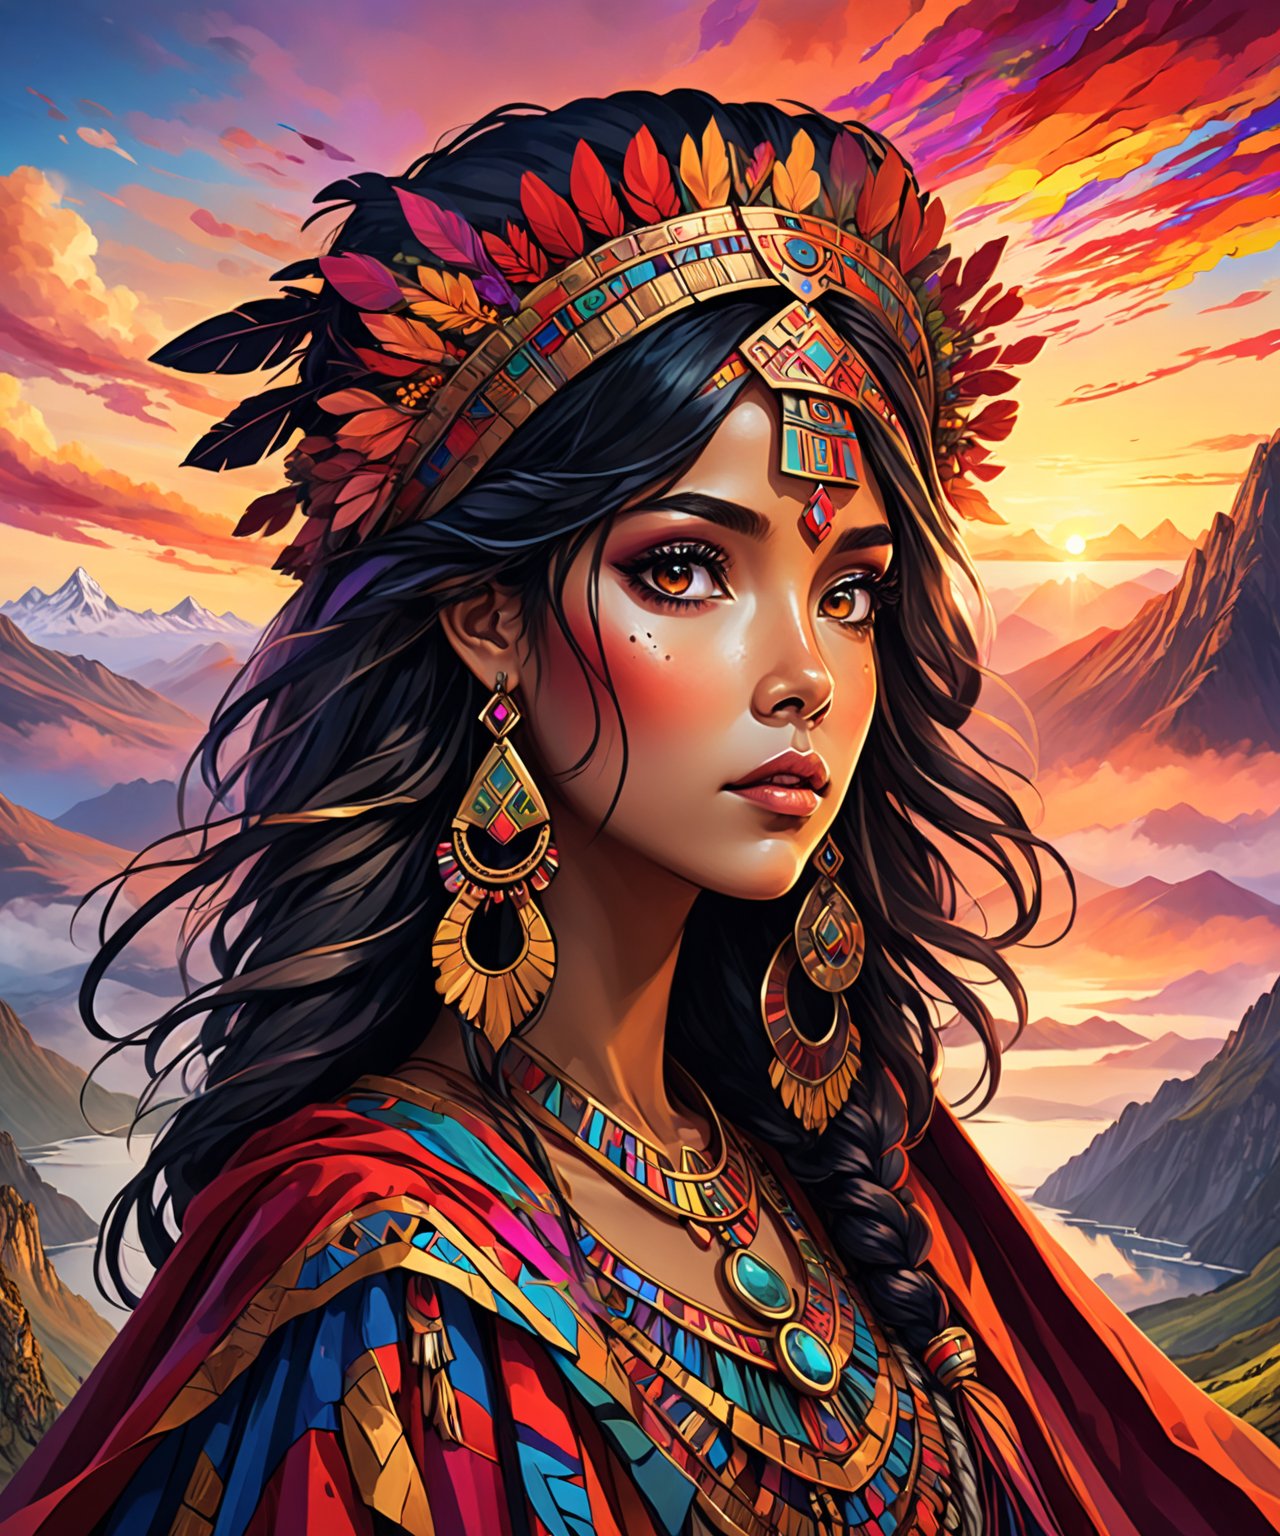 Masterpiece, 4K, ultra detailed, anime style, solo, 1 ancient Inca woman wearing a flowy cape on a mountain top, beautiful flawless face with goth makeup, dangling earrings, colorful headpiece, epic sunset, windy, more detail XL, SFW, depth of field, Ink art,